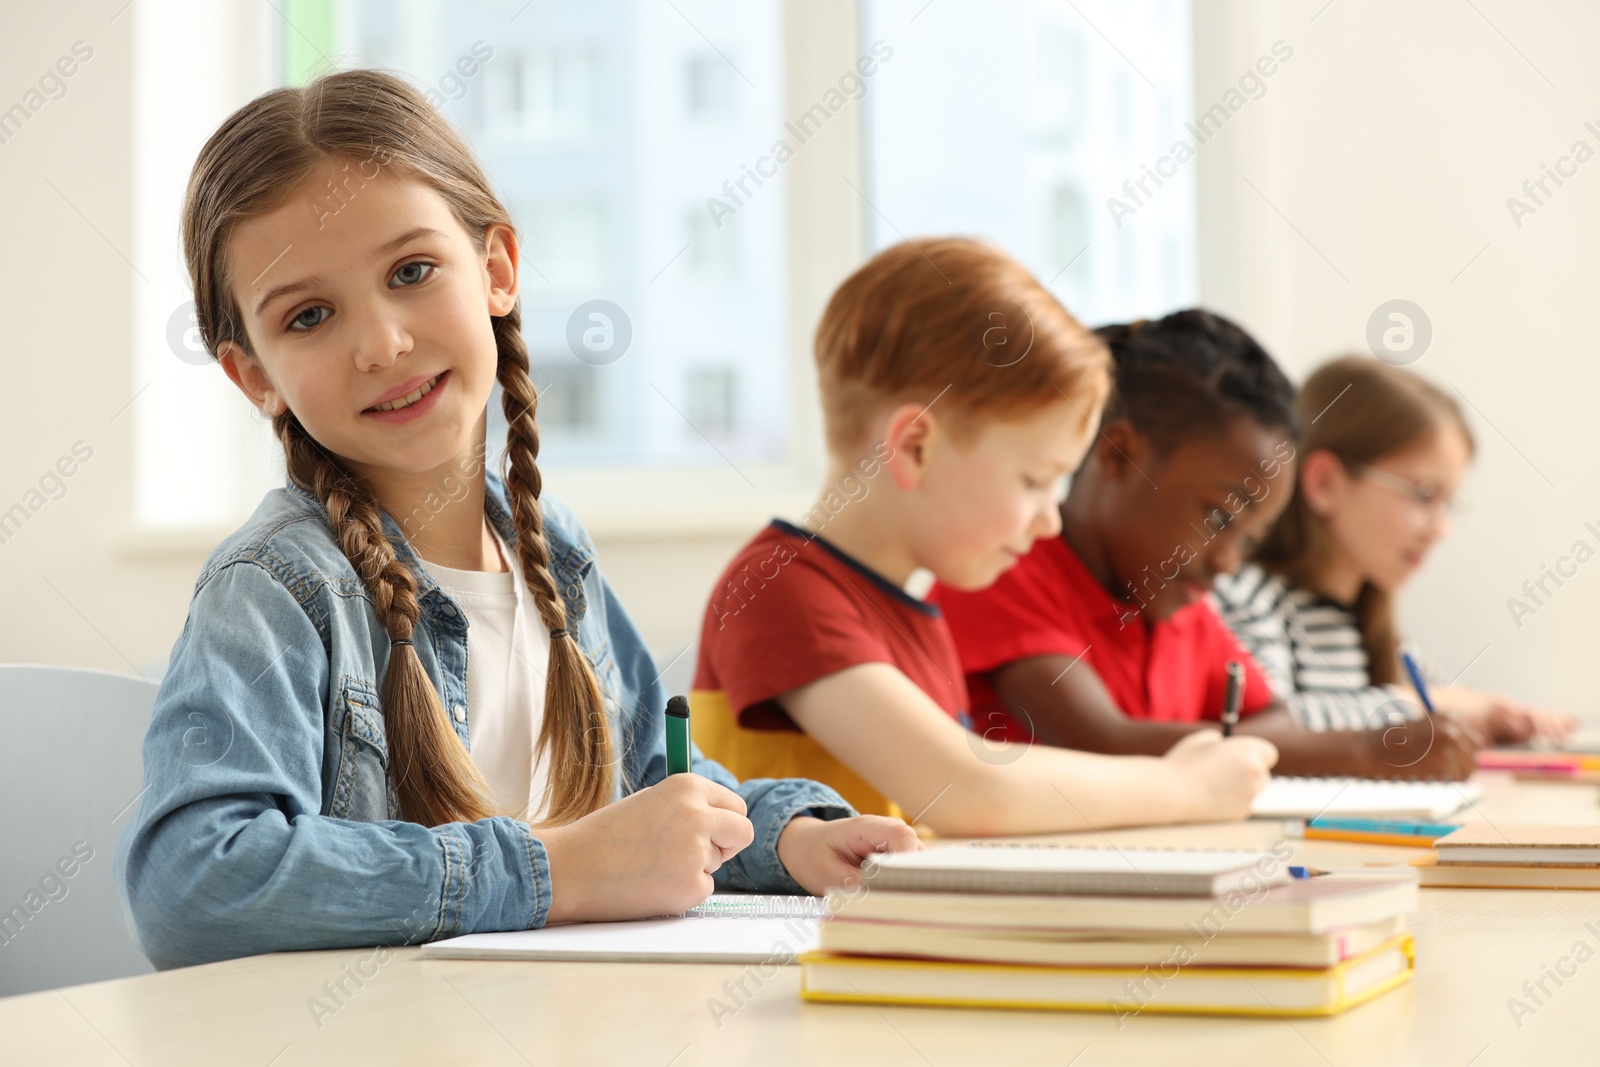 Photo of Smiling girl with her classmates studying in classroom at school